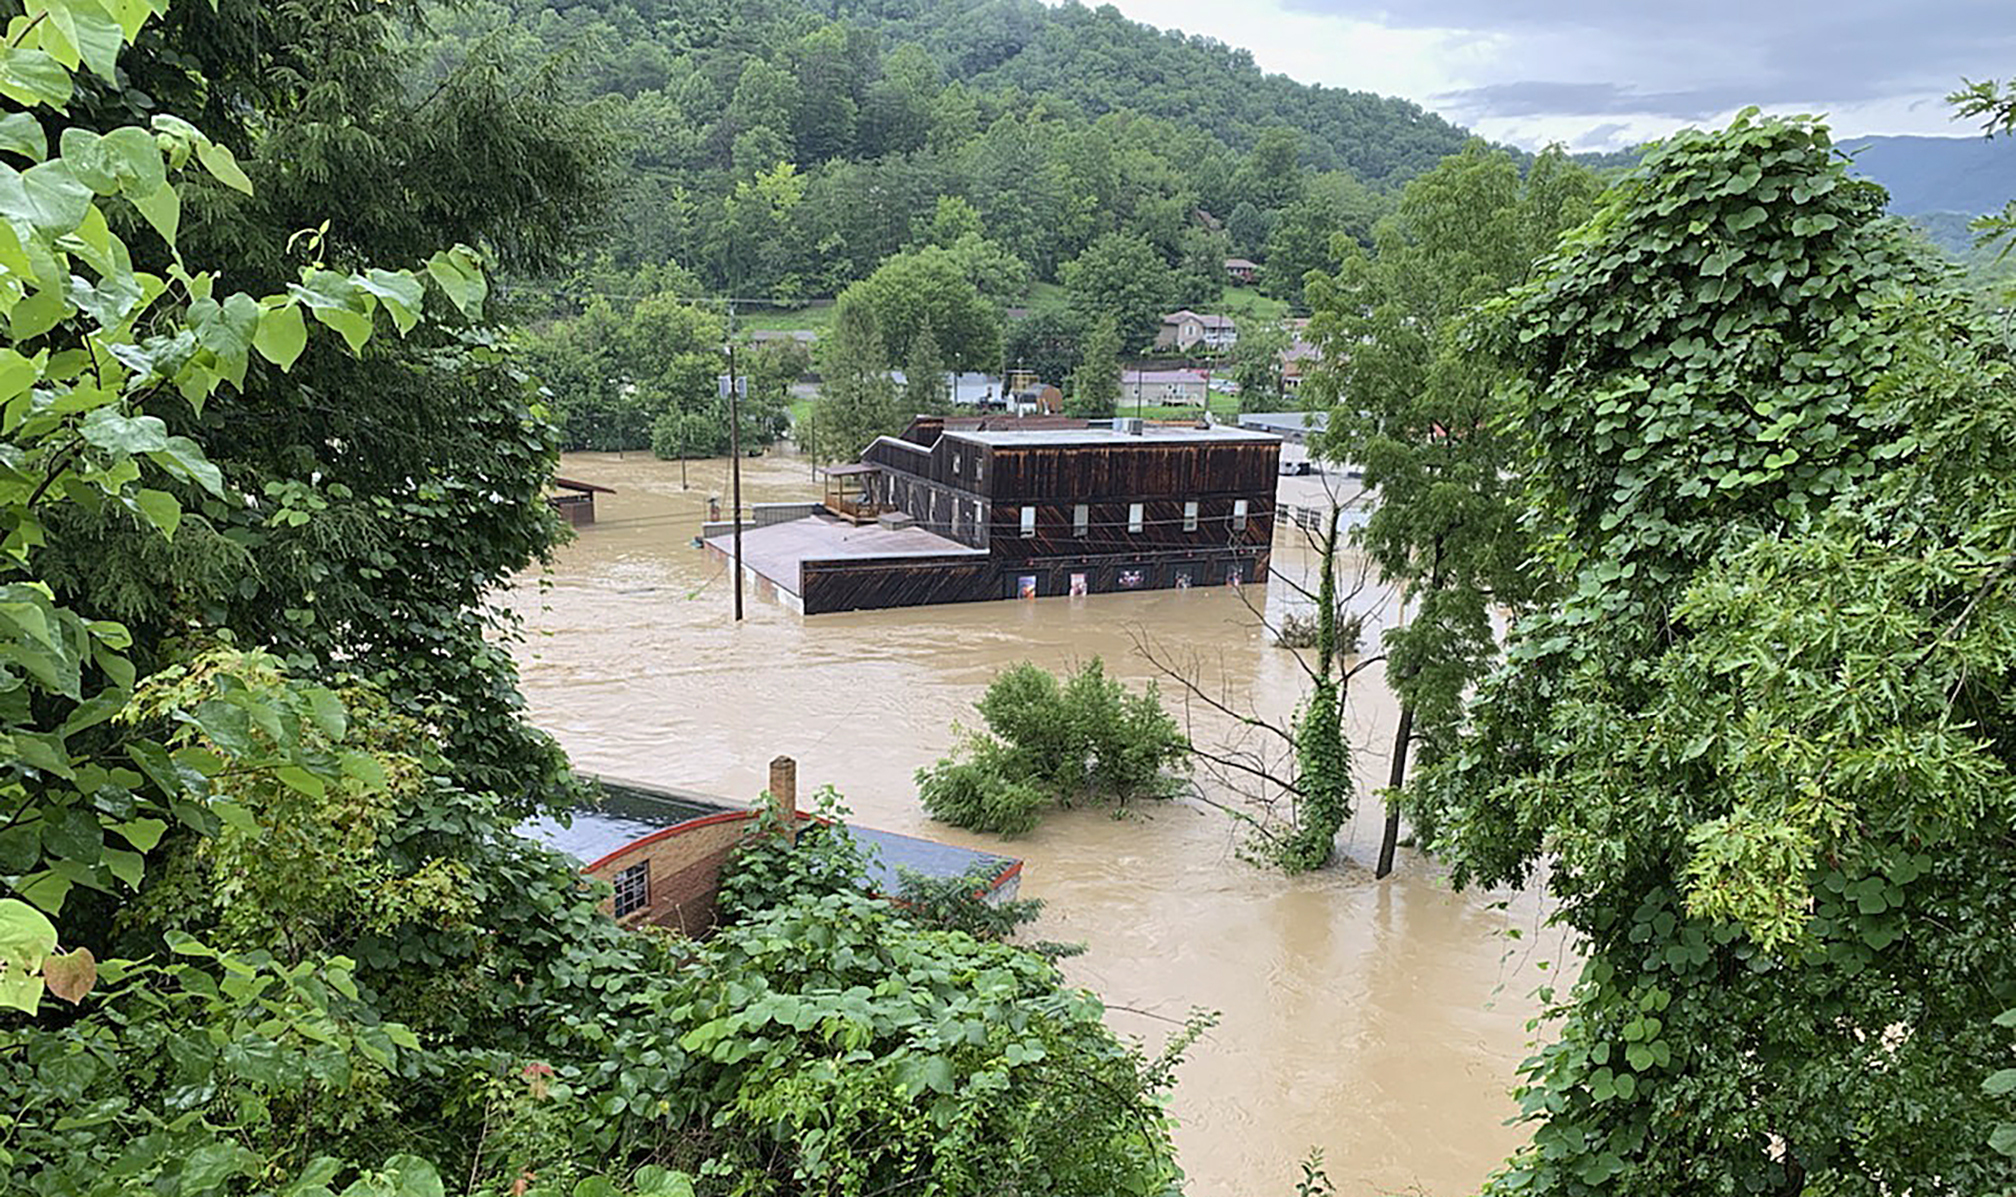 This July 28, 2022 photo provided by Appalshop shows the flooded Appalshop building in Whitesburg, Ky. The cultural center known for chronicling Appalachian life is cleaning up and assessing its losses. Like much of its stricken region, Appalshop has been swamped by historic flooding. The water inundated downtown Whitesburg in southeastern Kentucky, causing extensive damage to the renowned repository of Appalachian history and culture. (Appalshop via AP)